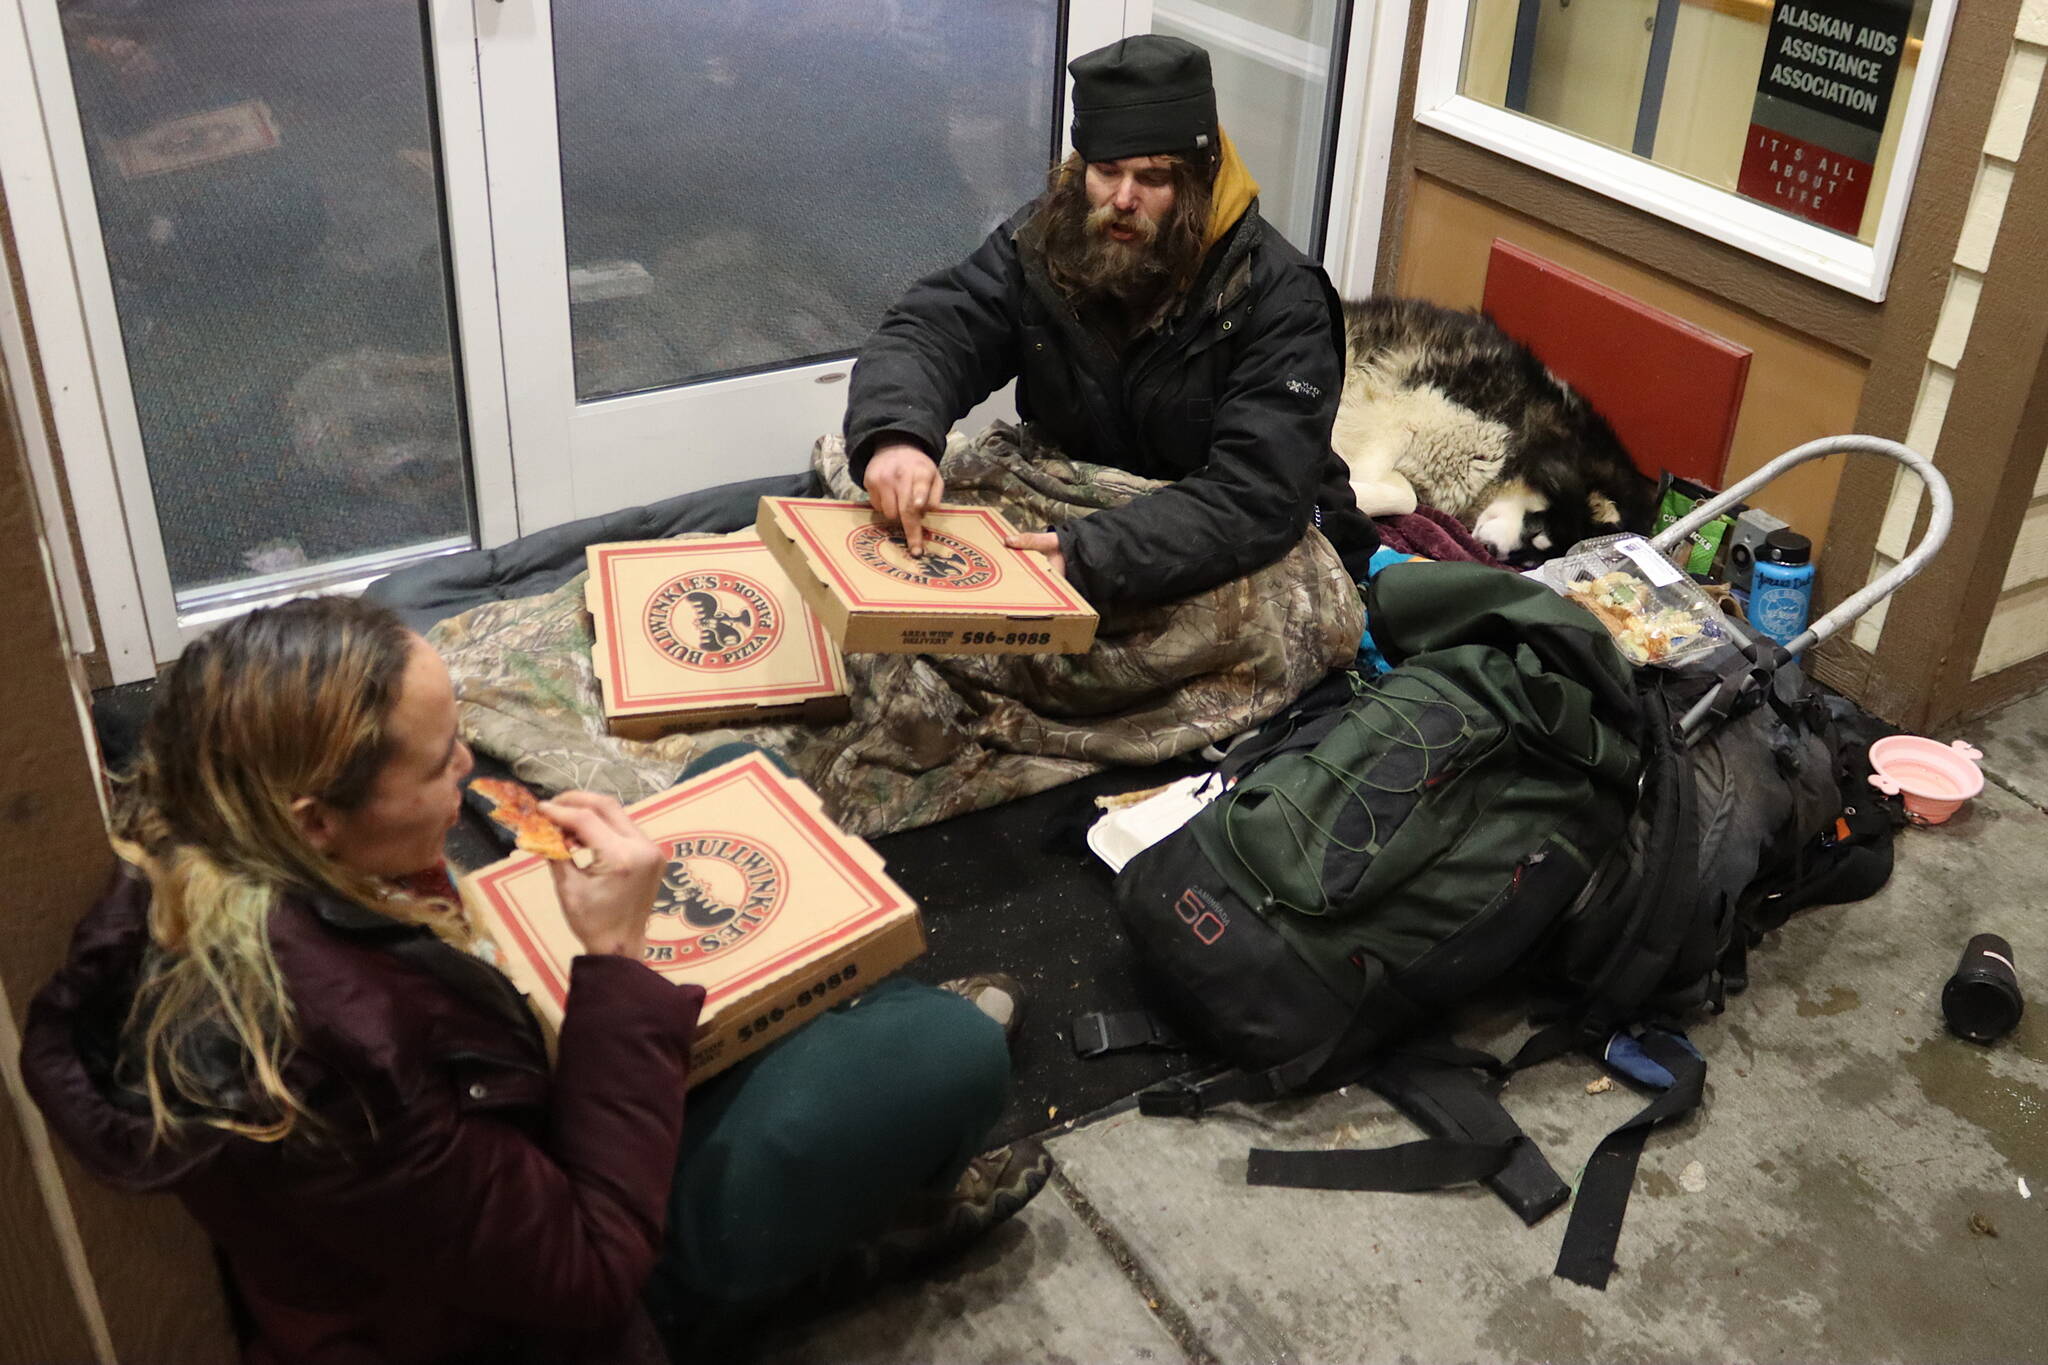 Steven Kissack and Jennifer Ross accept pizzas from a person who dropped them off anonymously where they were sitting at the sheltered entrance to a building on Front Street on Sunday evening. Ross and Kissack, accompanied by his dog Juno, were among a group of people gathering at the entrance who said they might spend some of Christmas Eve and/or Christmas Day at the warming shelter south of downtown, but were uncertain about their plans. (Mark Sabbatini / Juneau Empire)